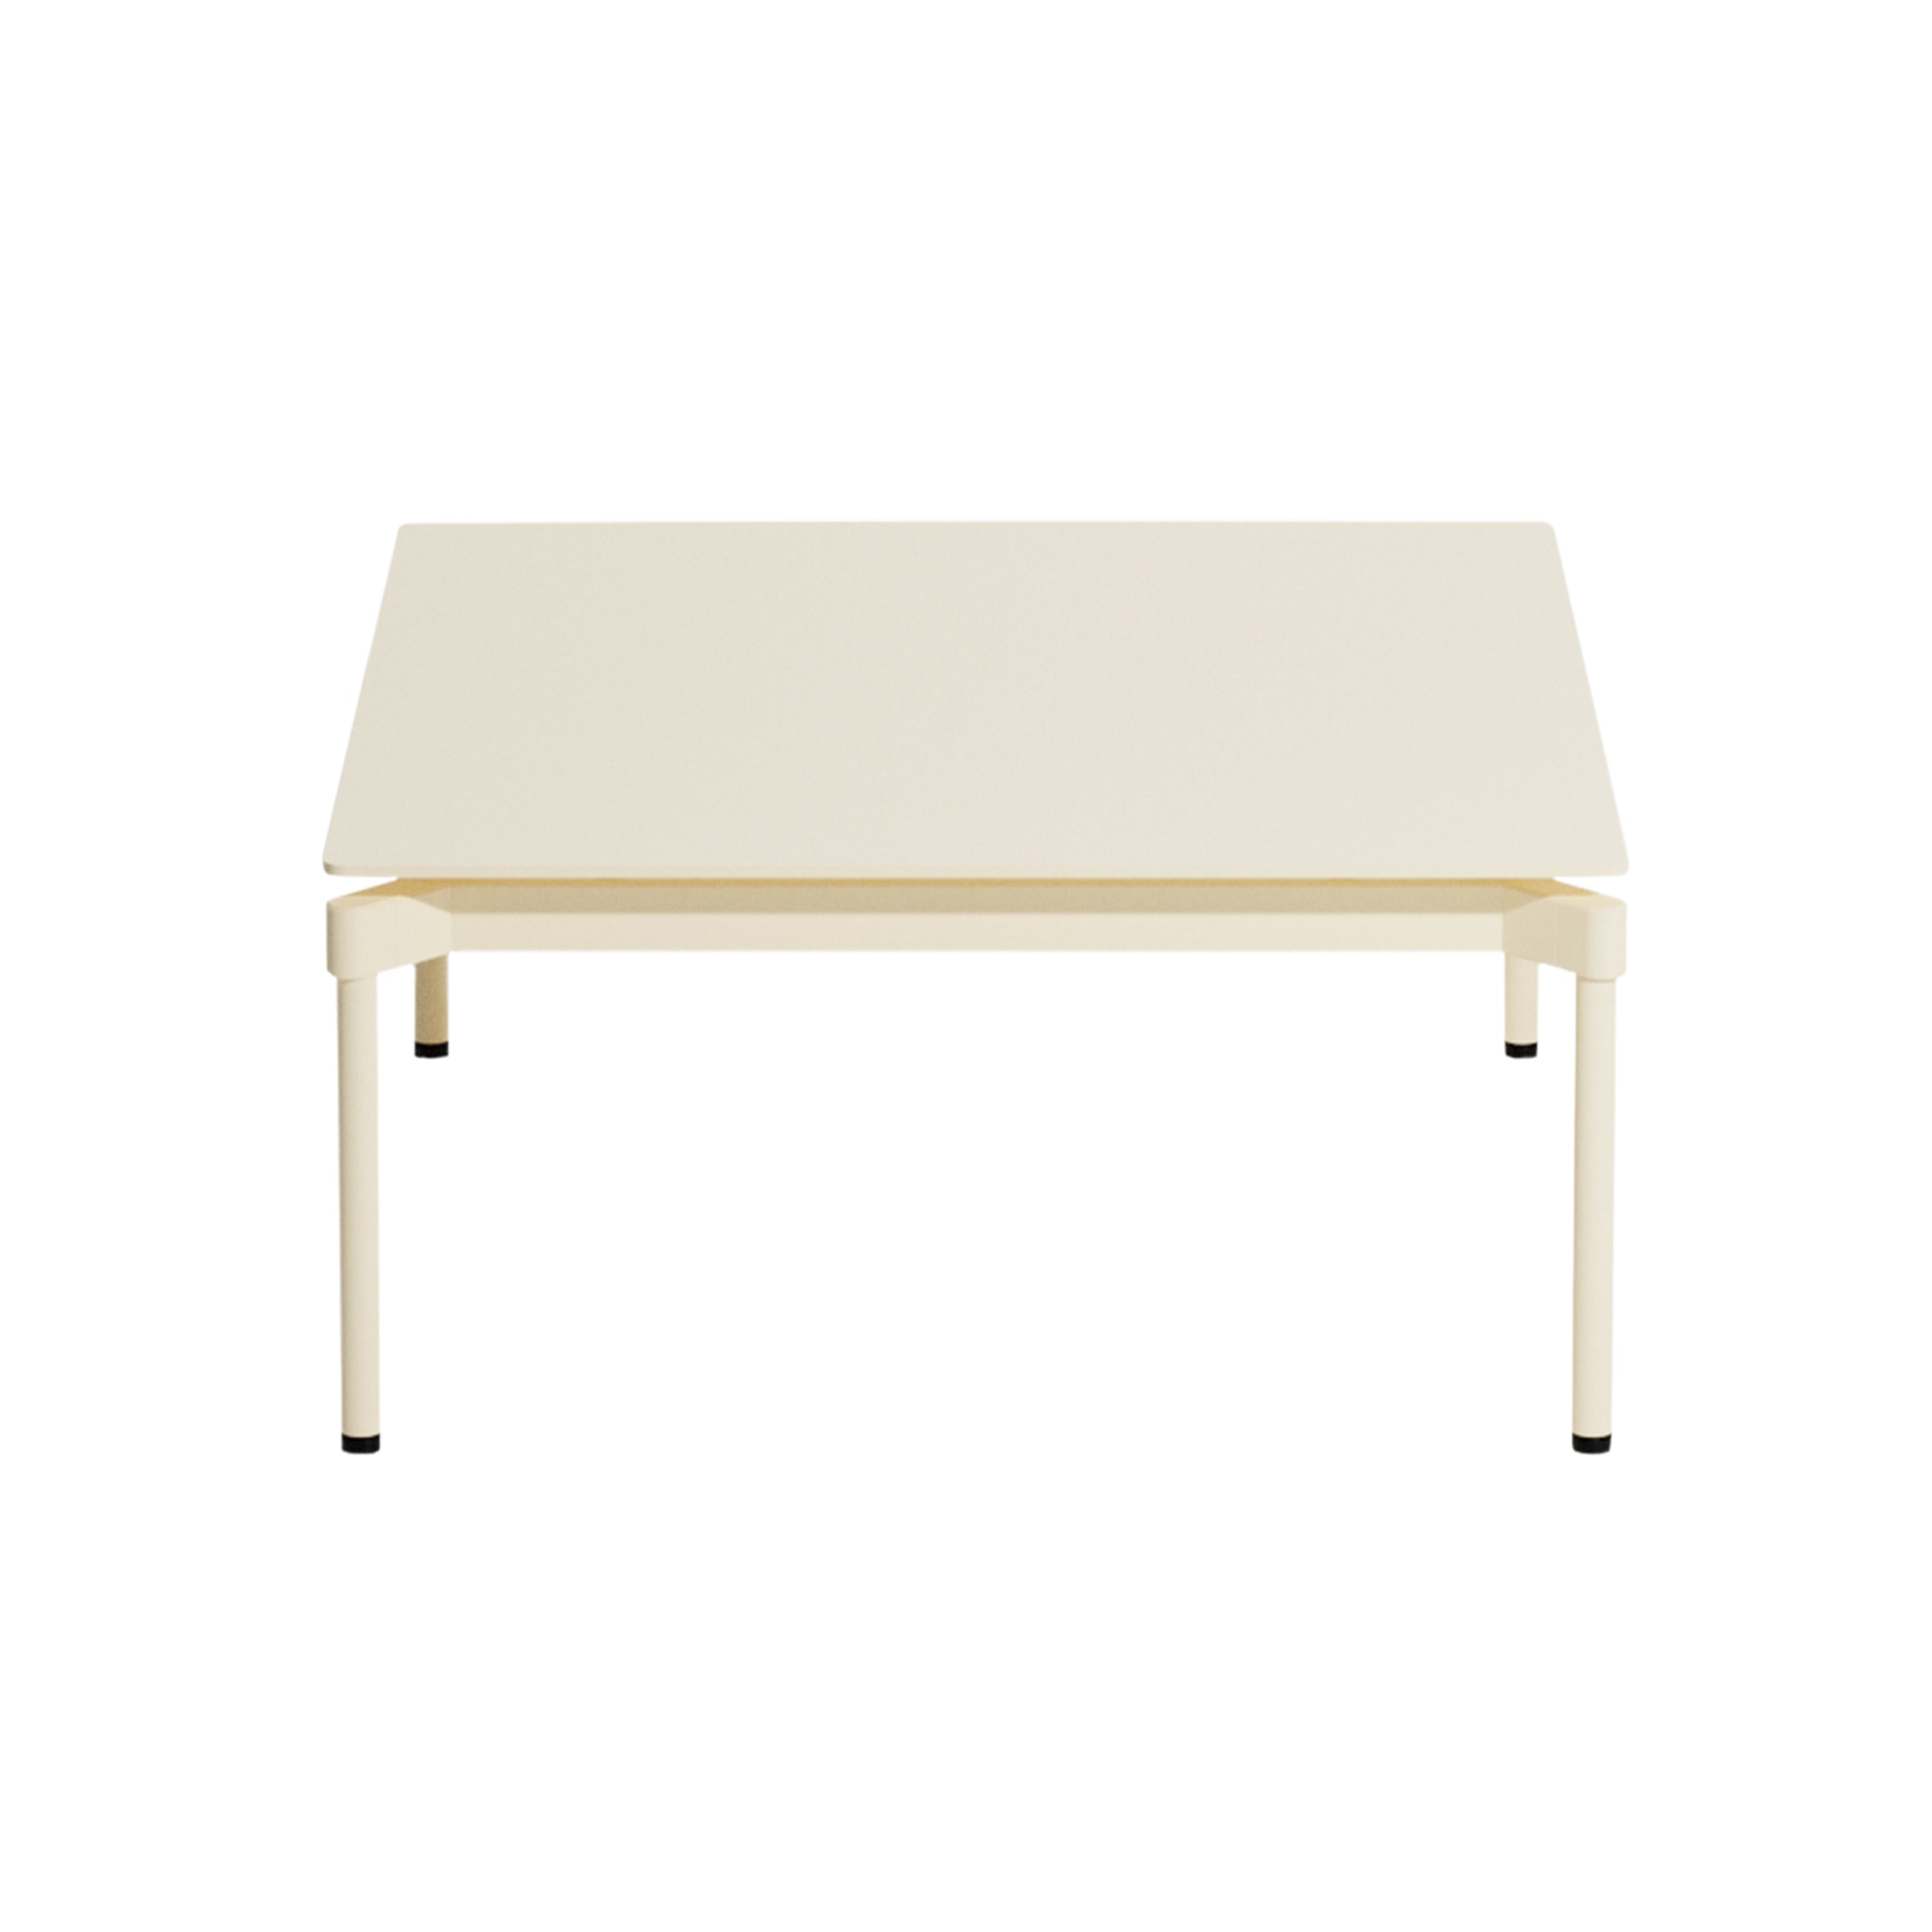 Fromme Coffee Table: Ivory